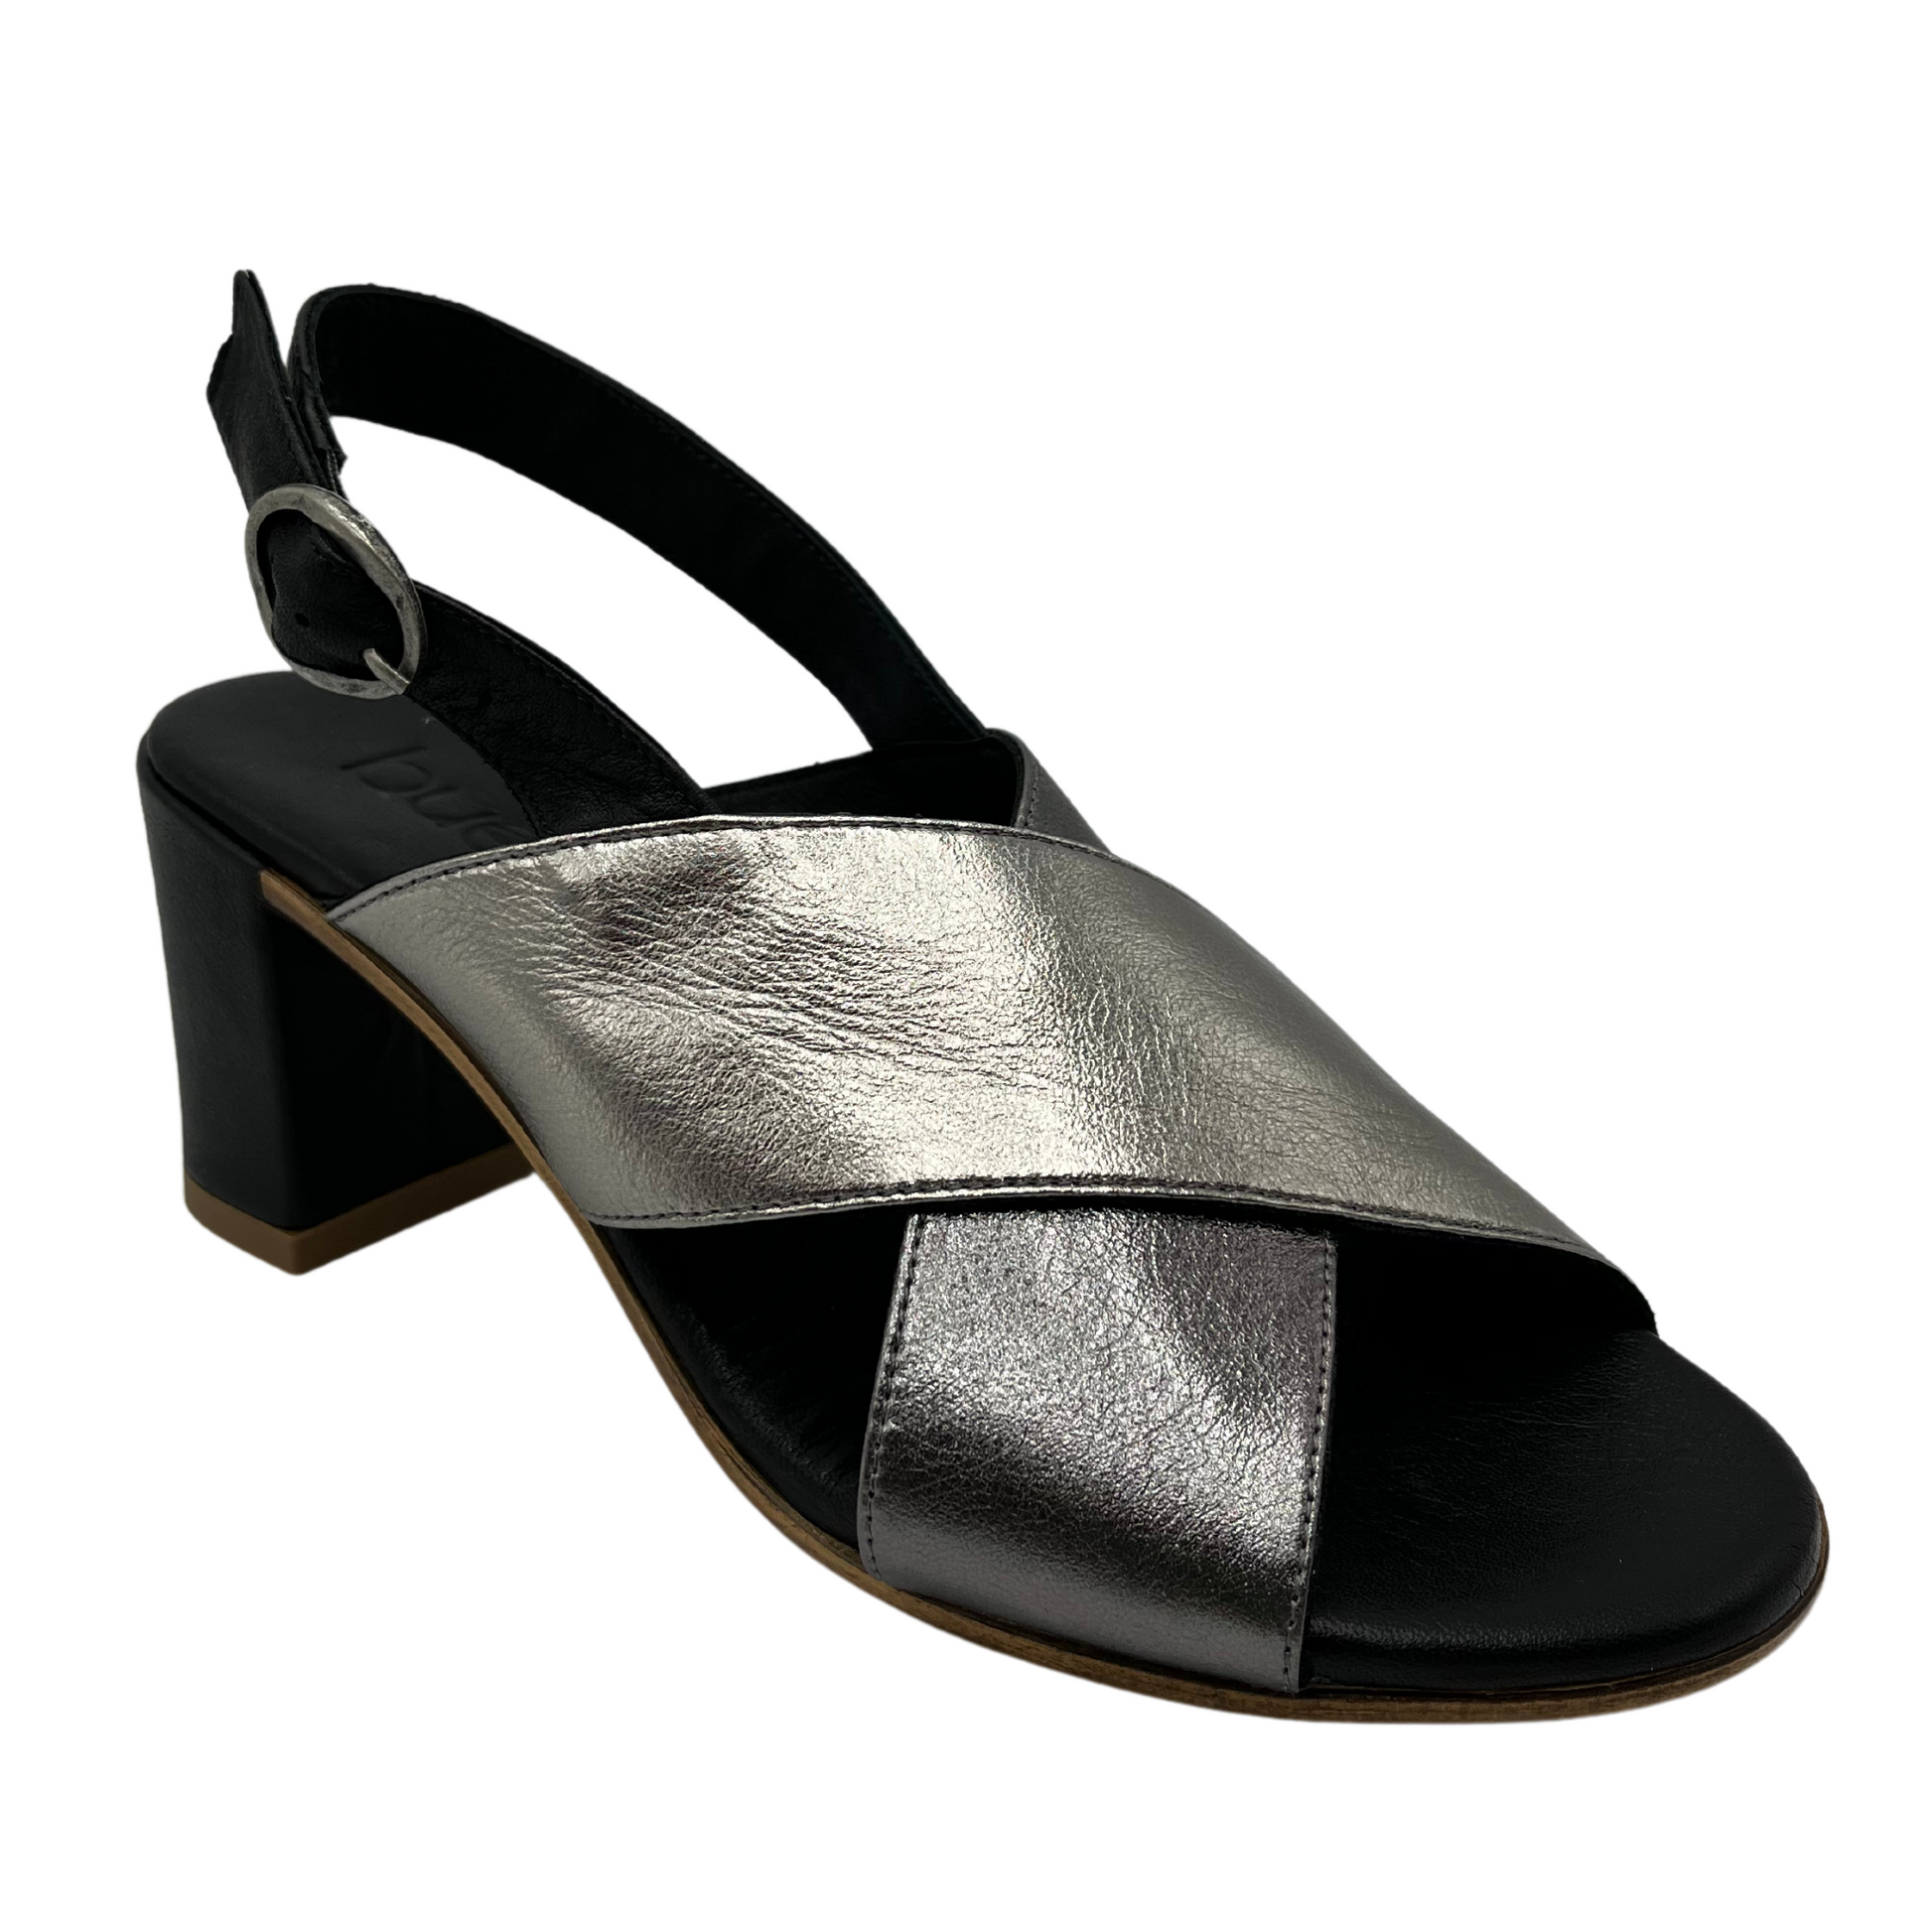 45 degree angled view of black and silver sandal with block heel and slingback strap